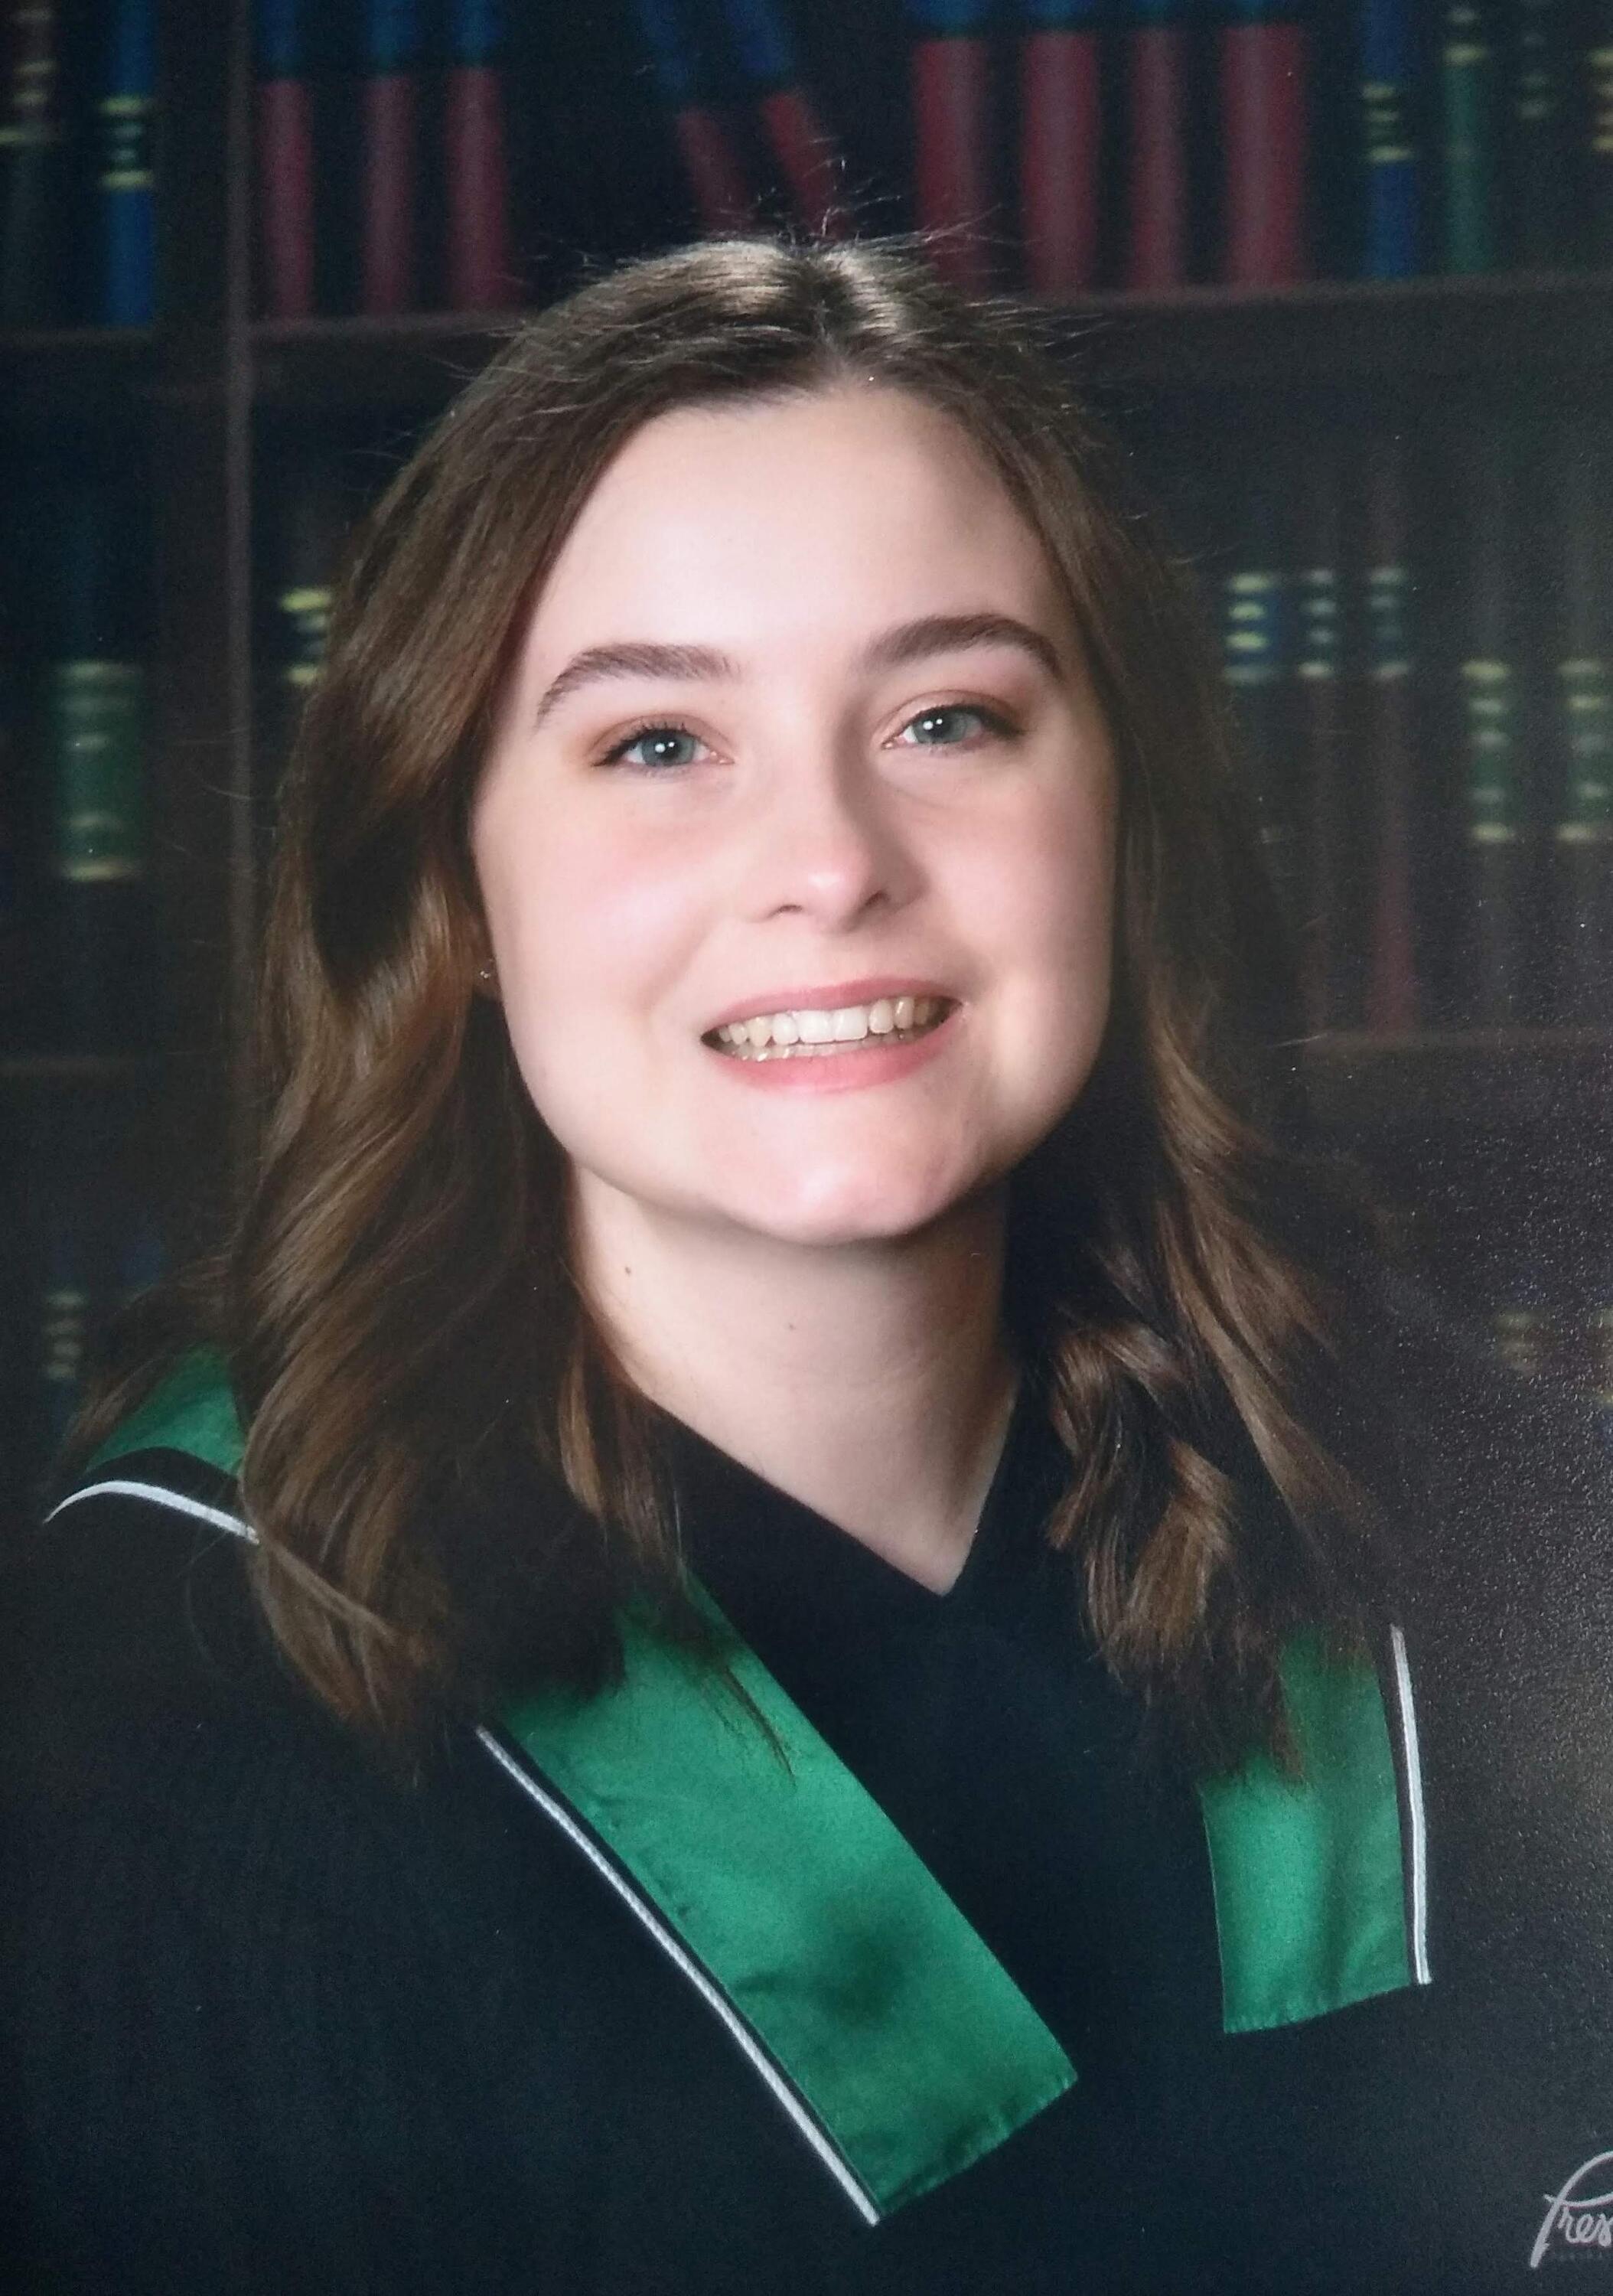 Photo of Daynica smiling, wearing a green and black graduation gown